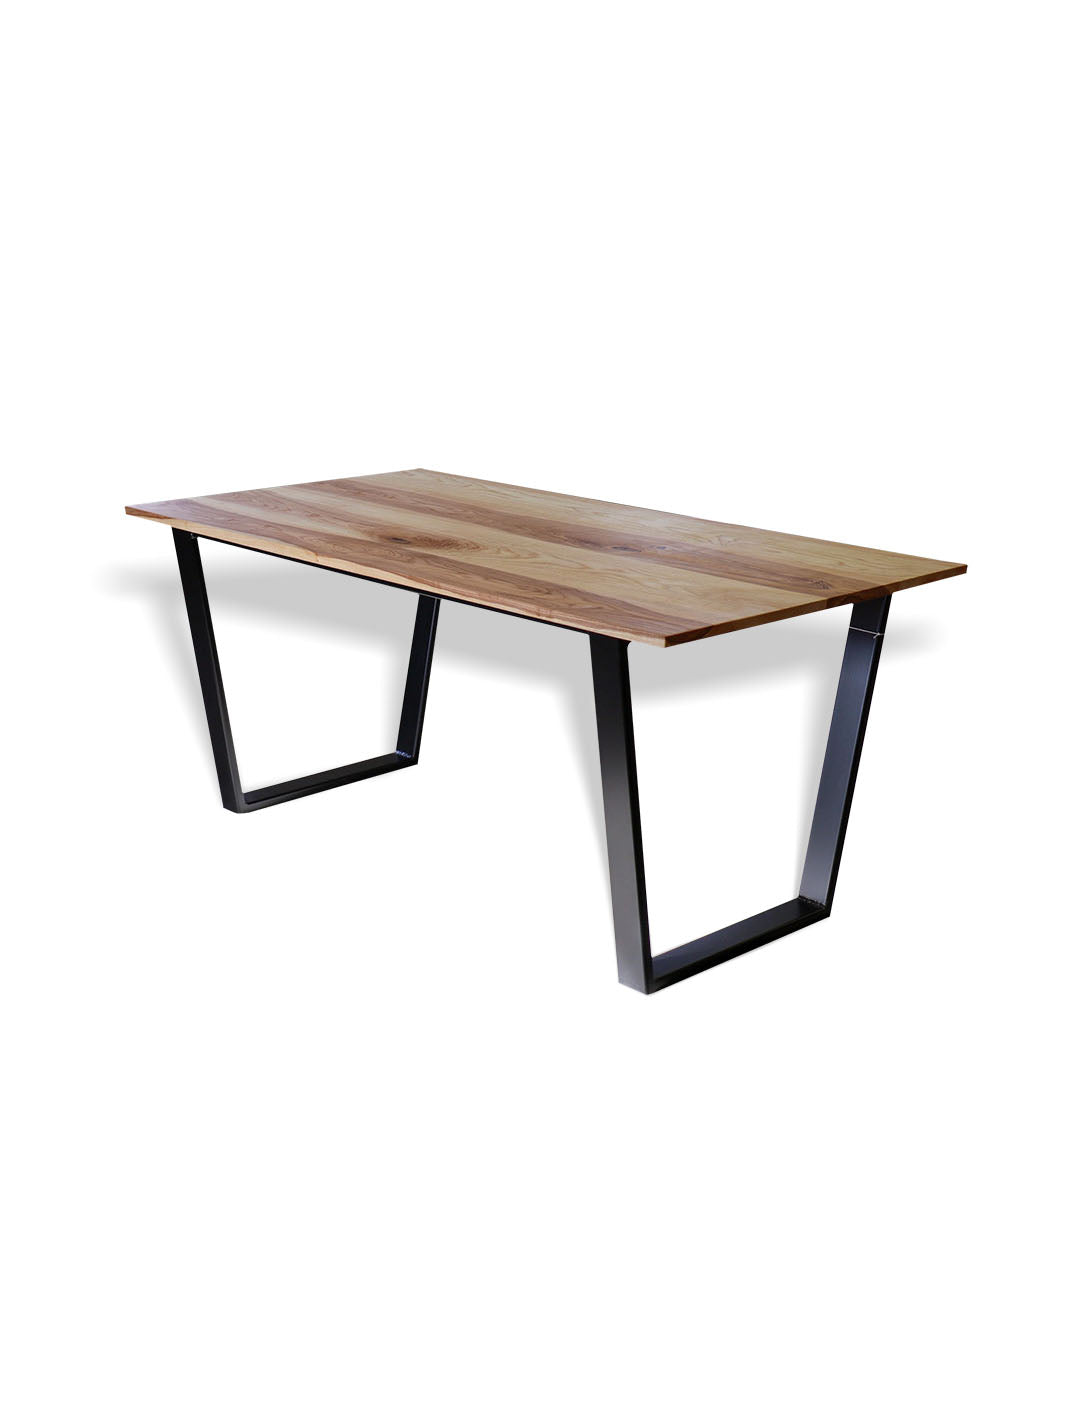 Earthly Comfort Modern Ash Dining Table Earthly Comfort Dining Tables 1850